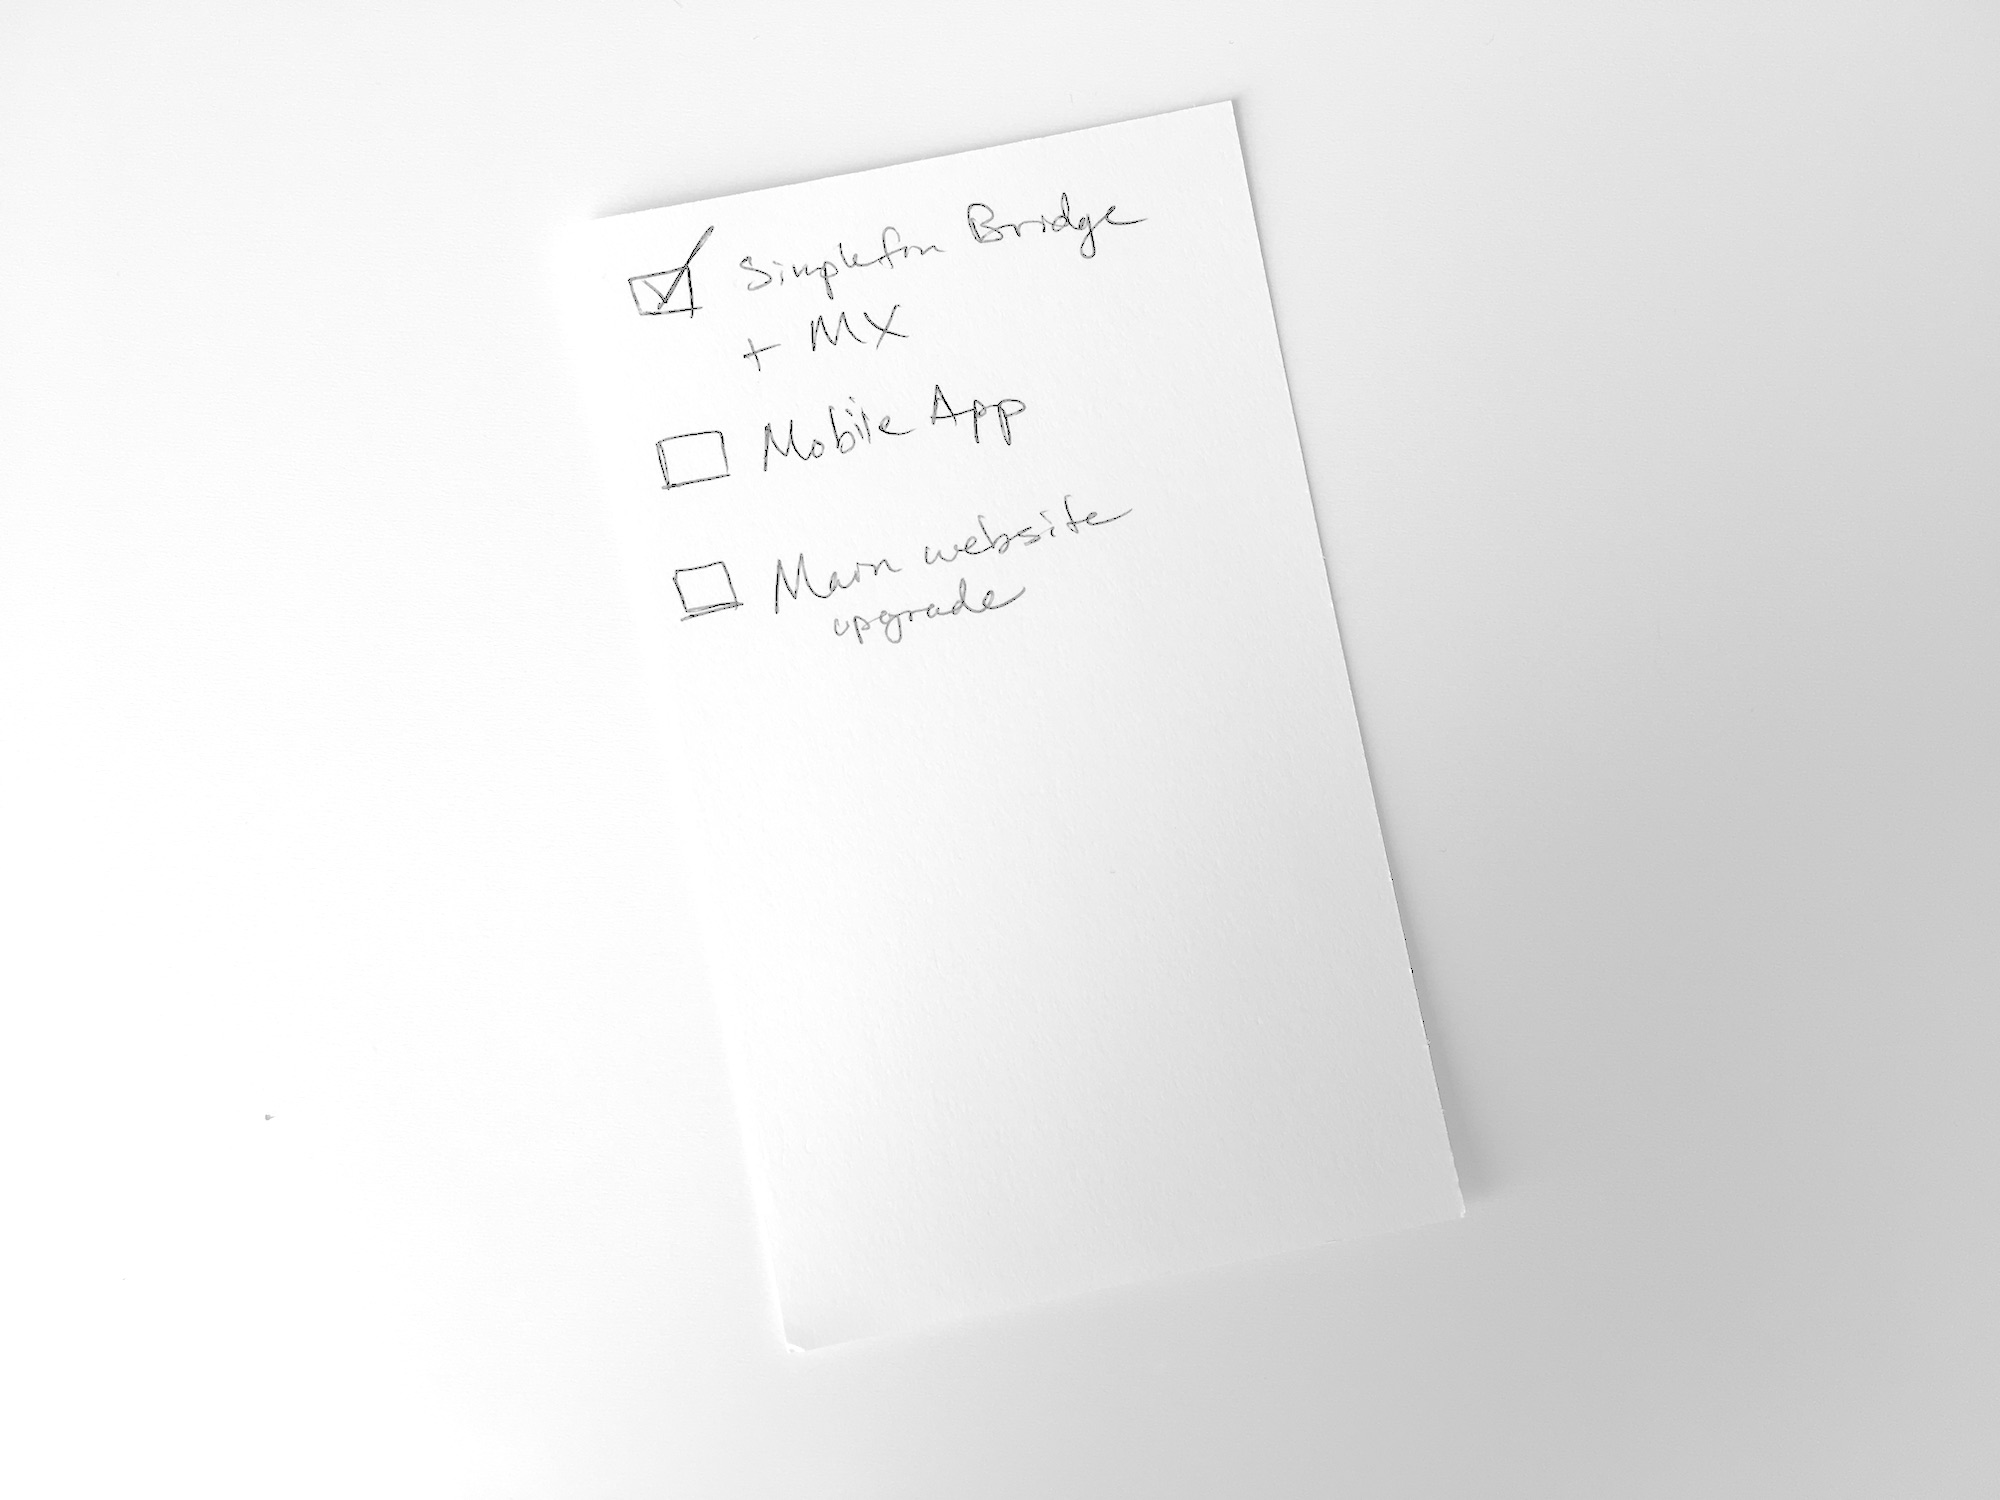 A todo list with the second item being Mobile App